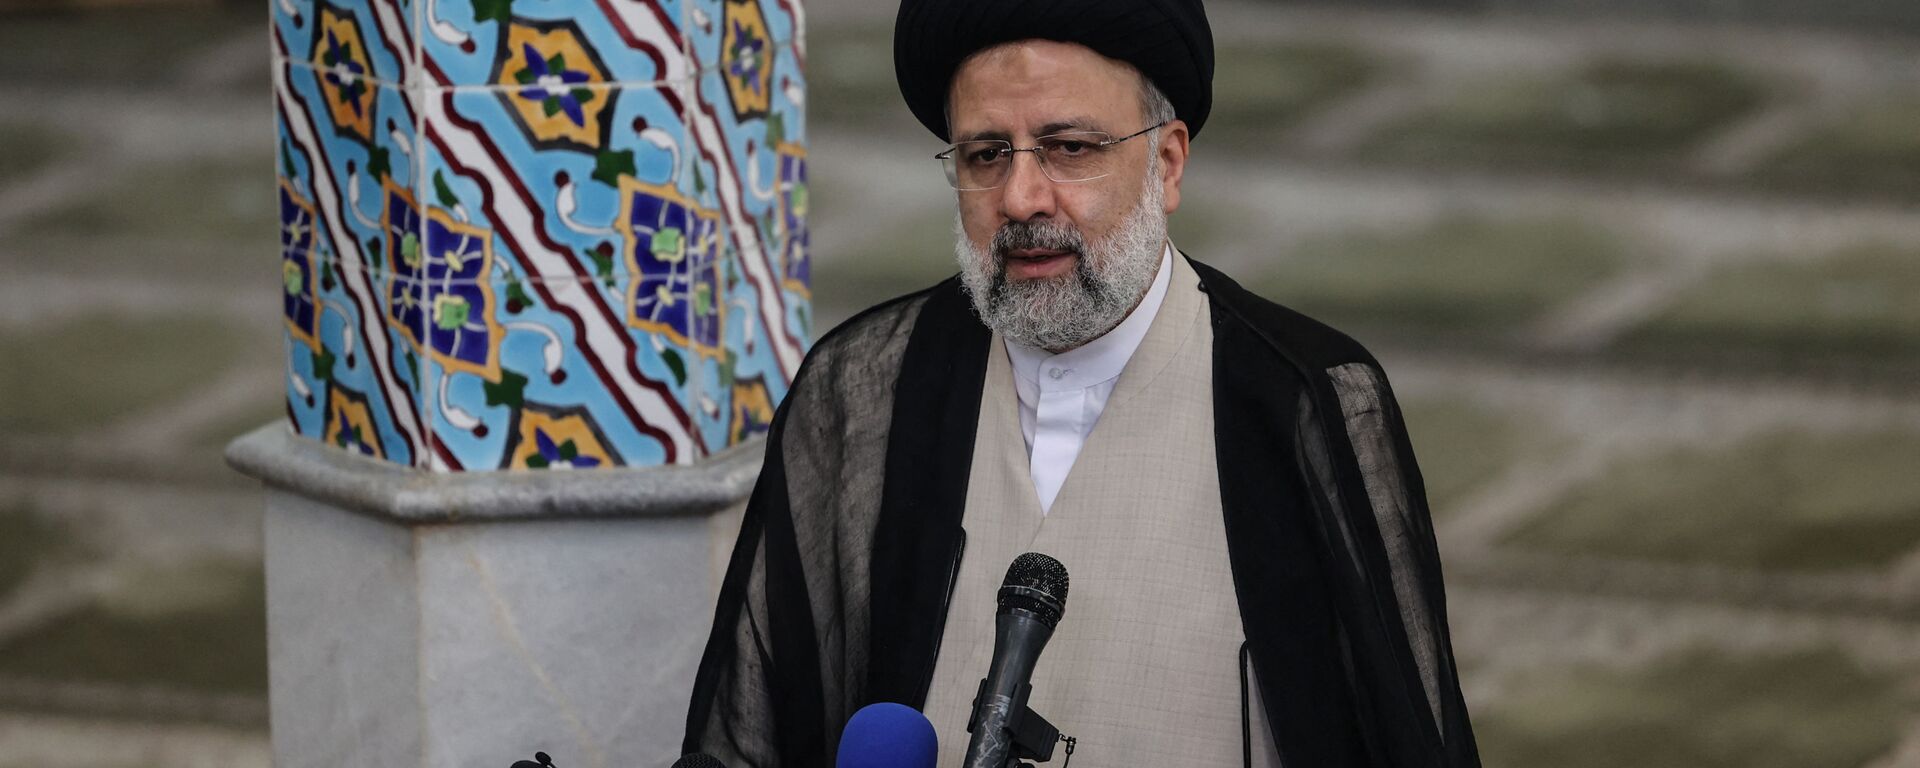 Ebrahim Raisi gives a news conference after voting in the presidential election, at a polling station in the capital Tehran, on June 18, 2021. - Raisi on June 19 declared the winner of a presidential election, a widely anticipated result after many political heavyweights were barred from running. - Sputnik India, 1920, 03.05.2023